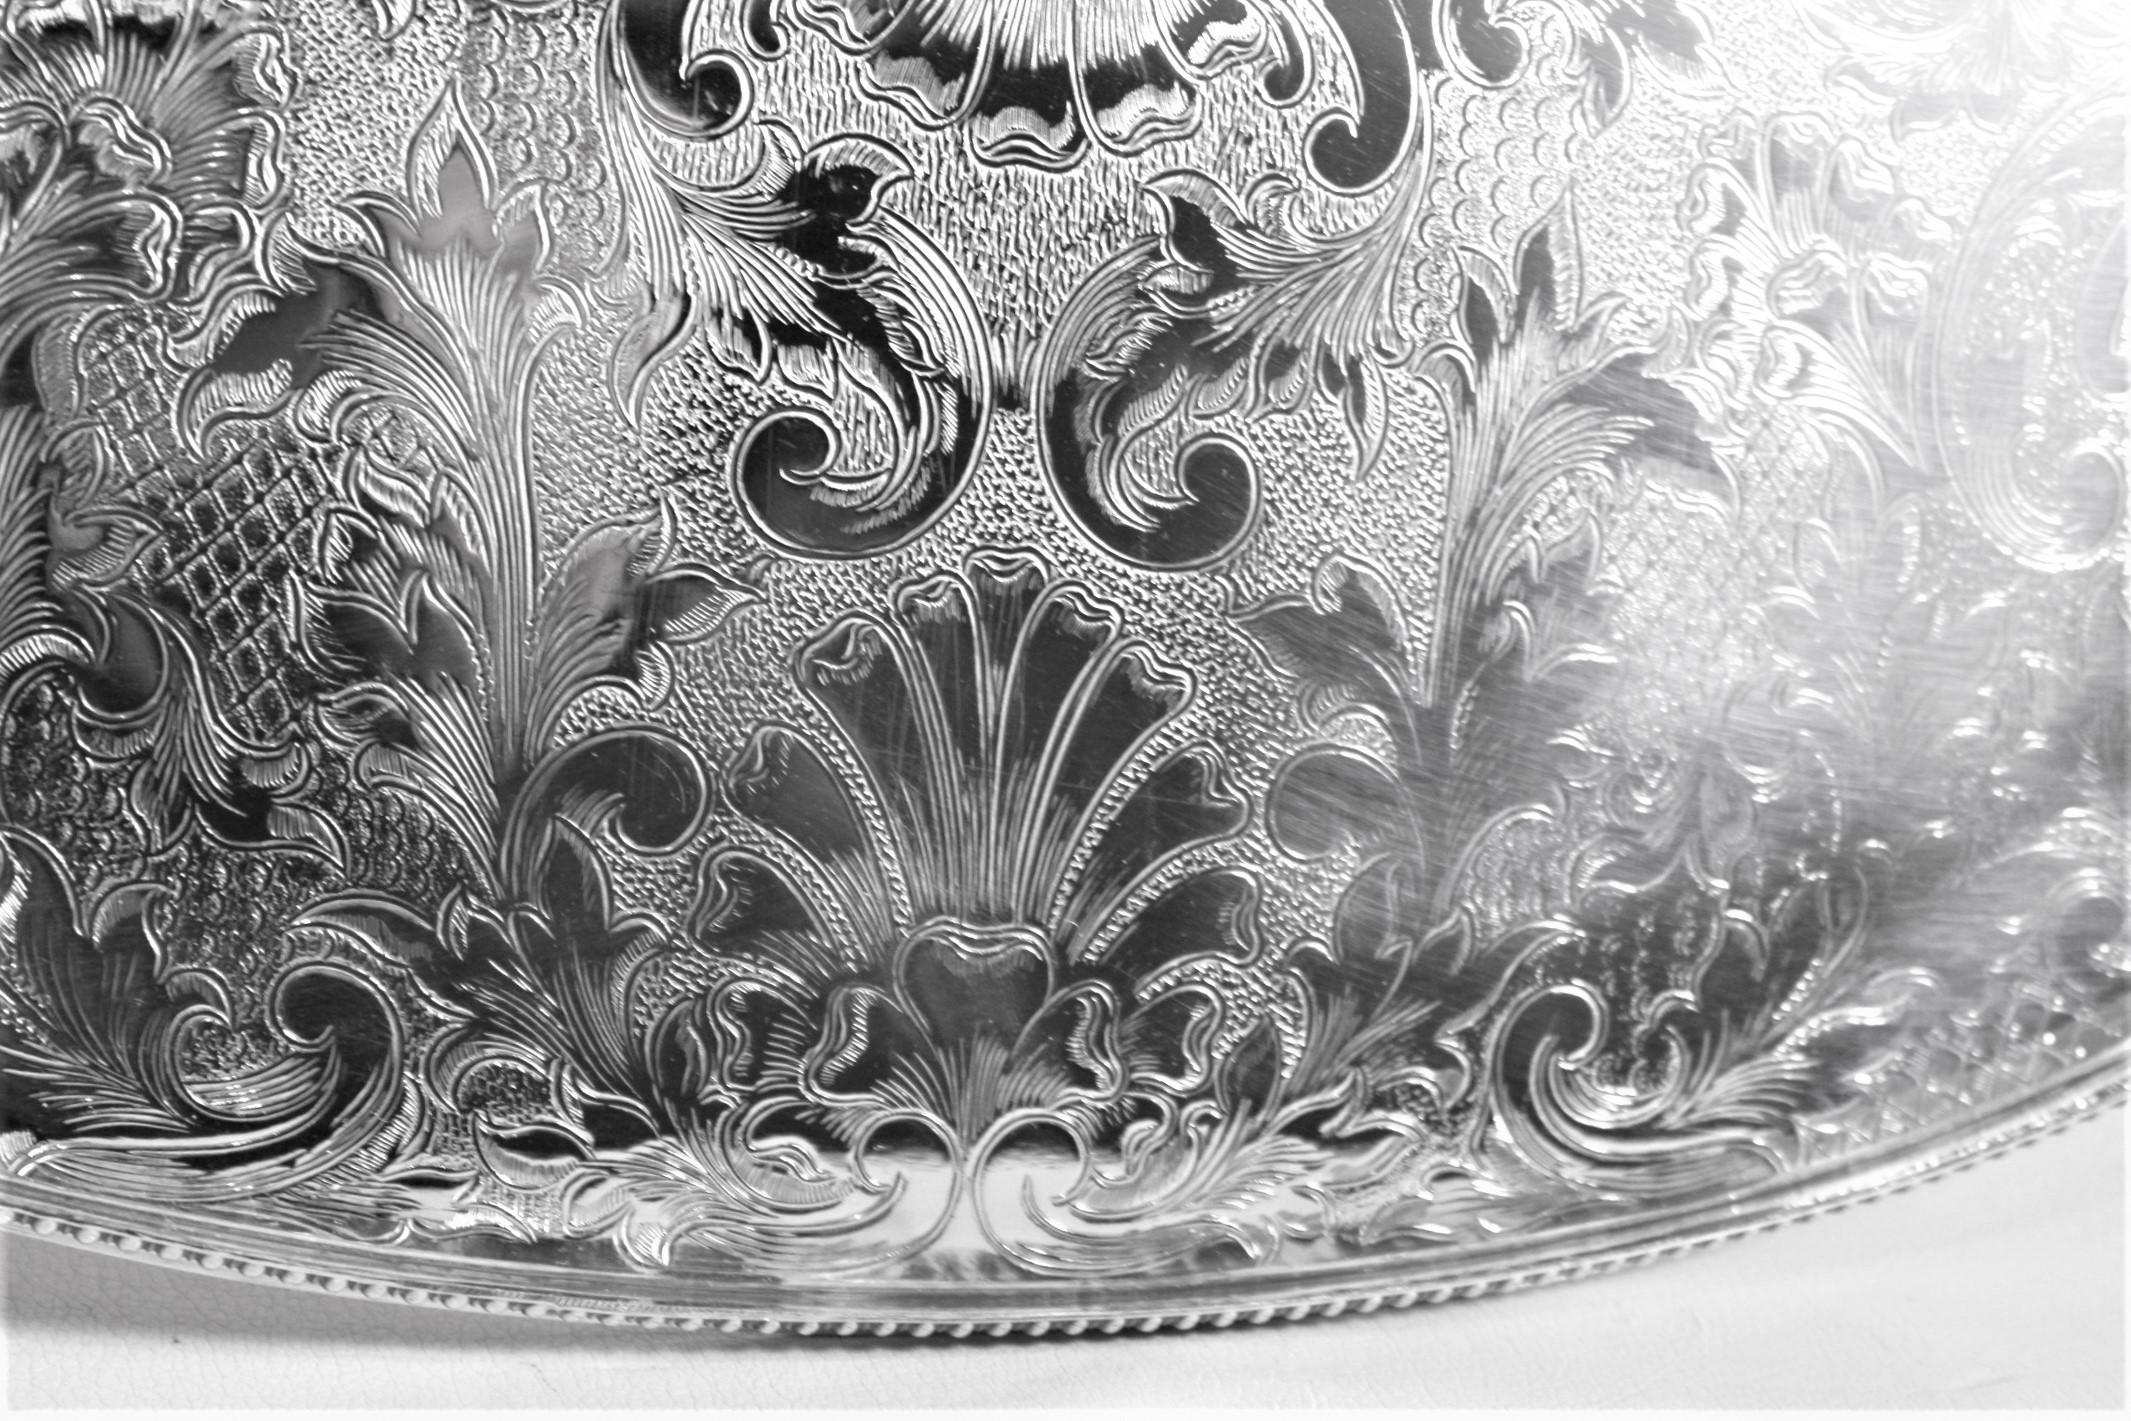 Antique English Silver Plated Footed Gallery Serving Tray with Ornate Engraving For Sale 4